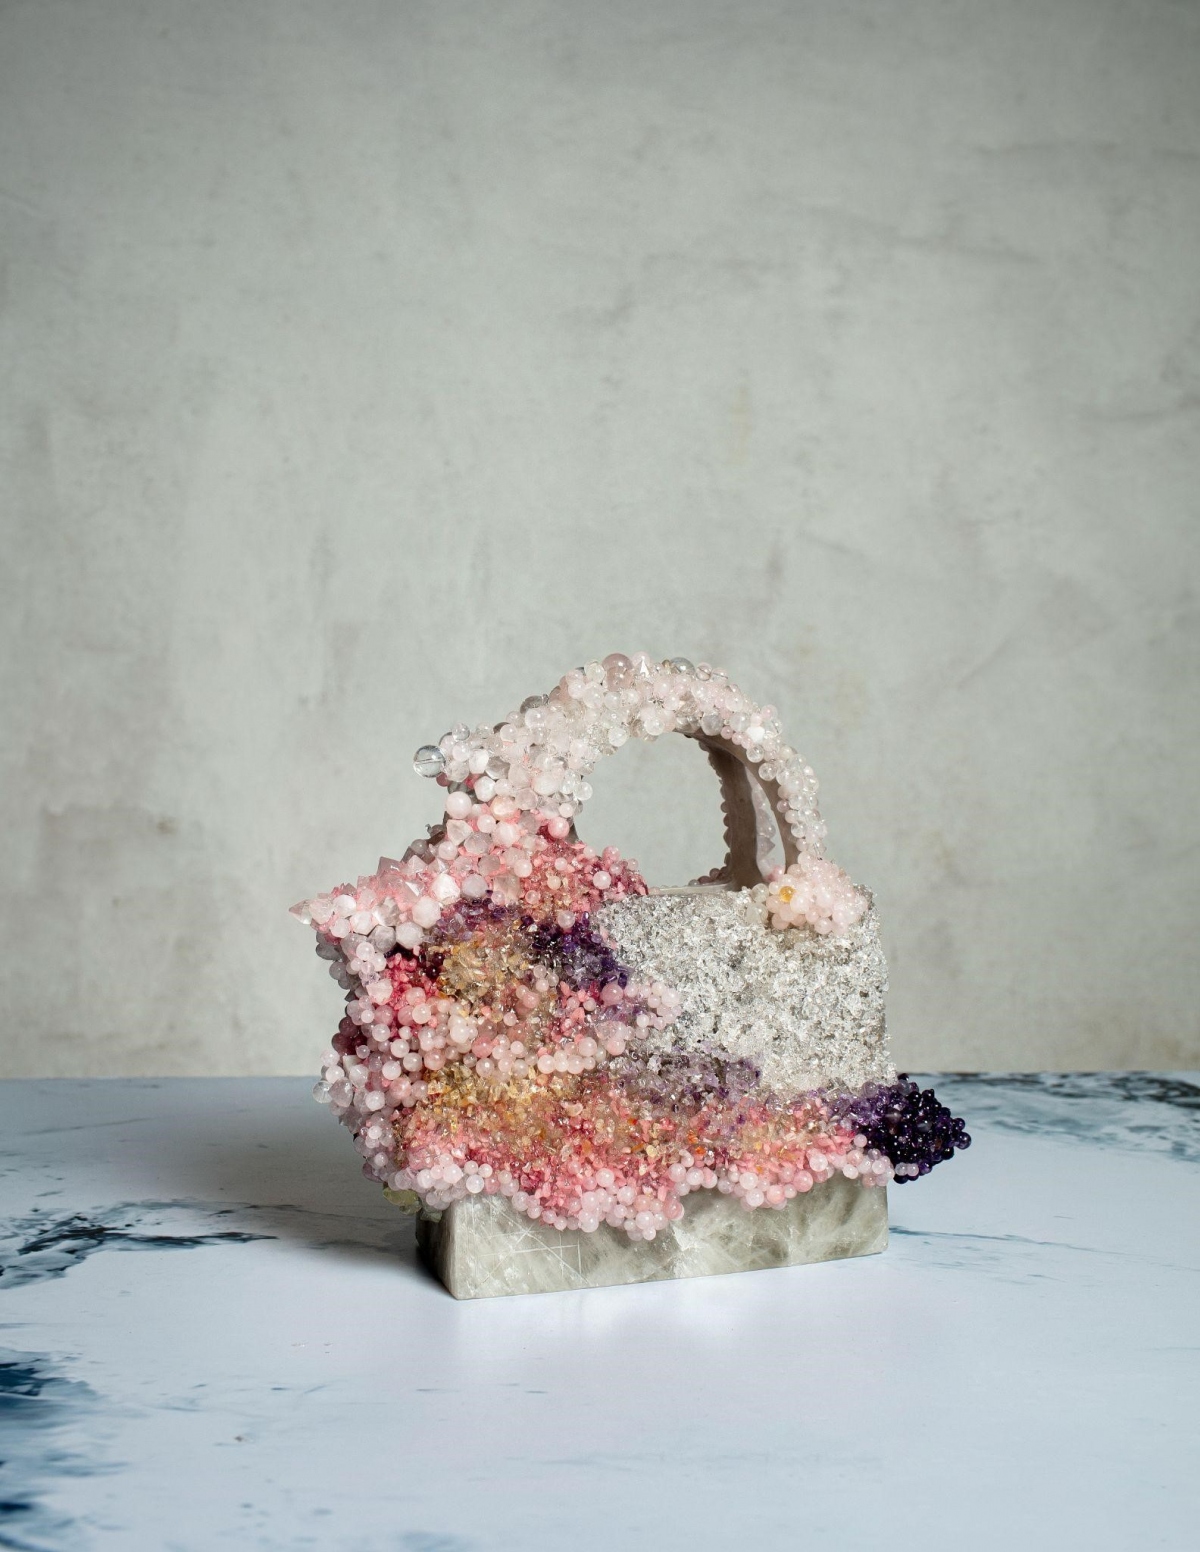 tia-thuy nguyen uses quartz stones to make artwork from legendary lady dior bag picture 3